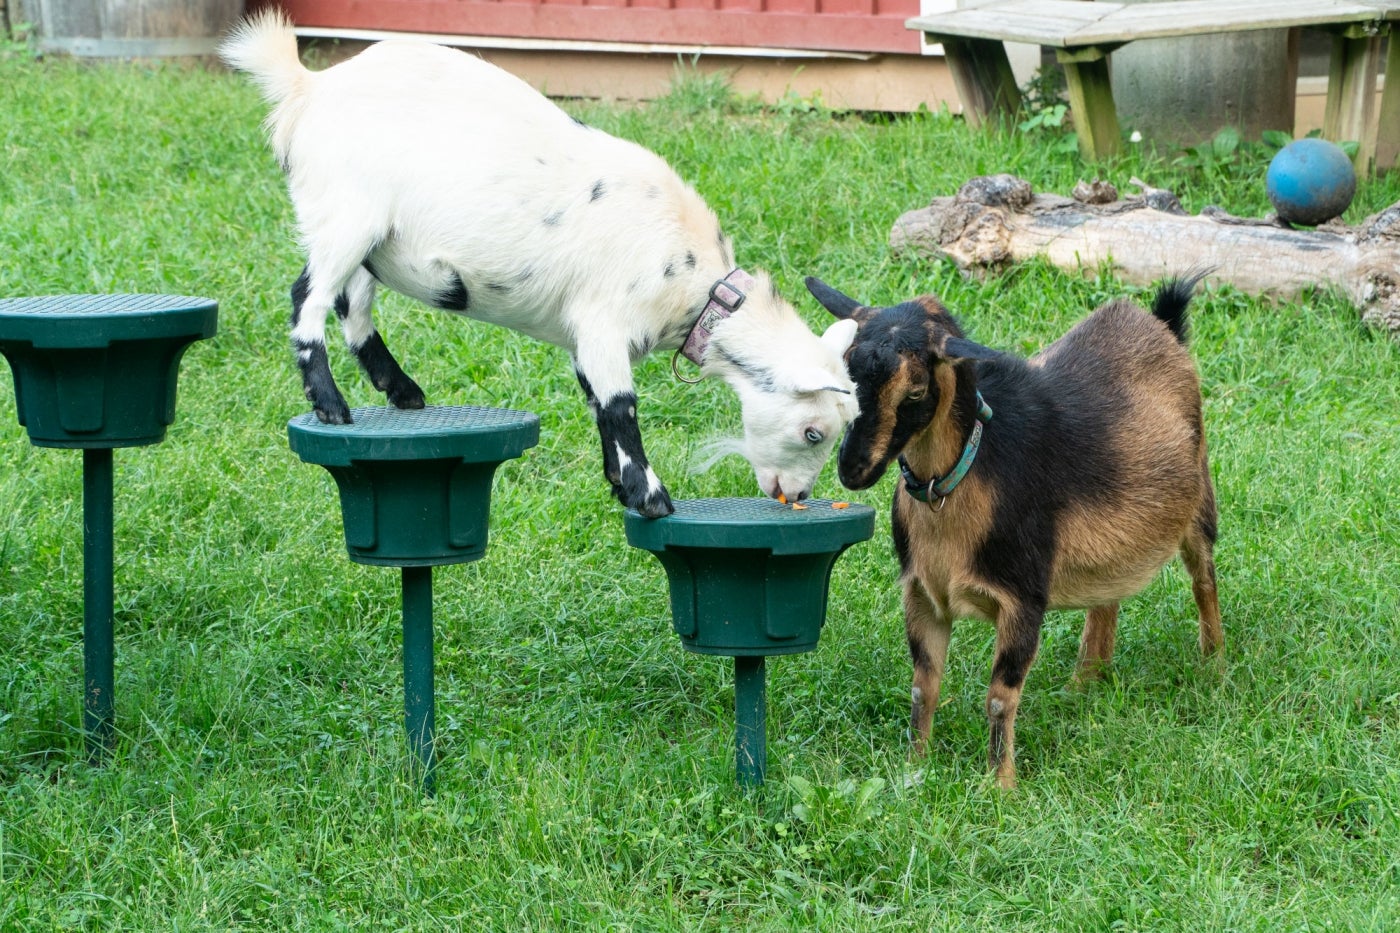 Fiesta (left) and Fedora (right) enjoy a treat in their yard at Kids’ Farm. Fiesta stands on two pedestals, while Fedora stands in the grass.